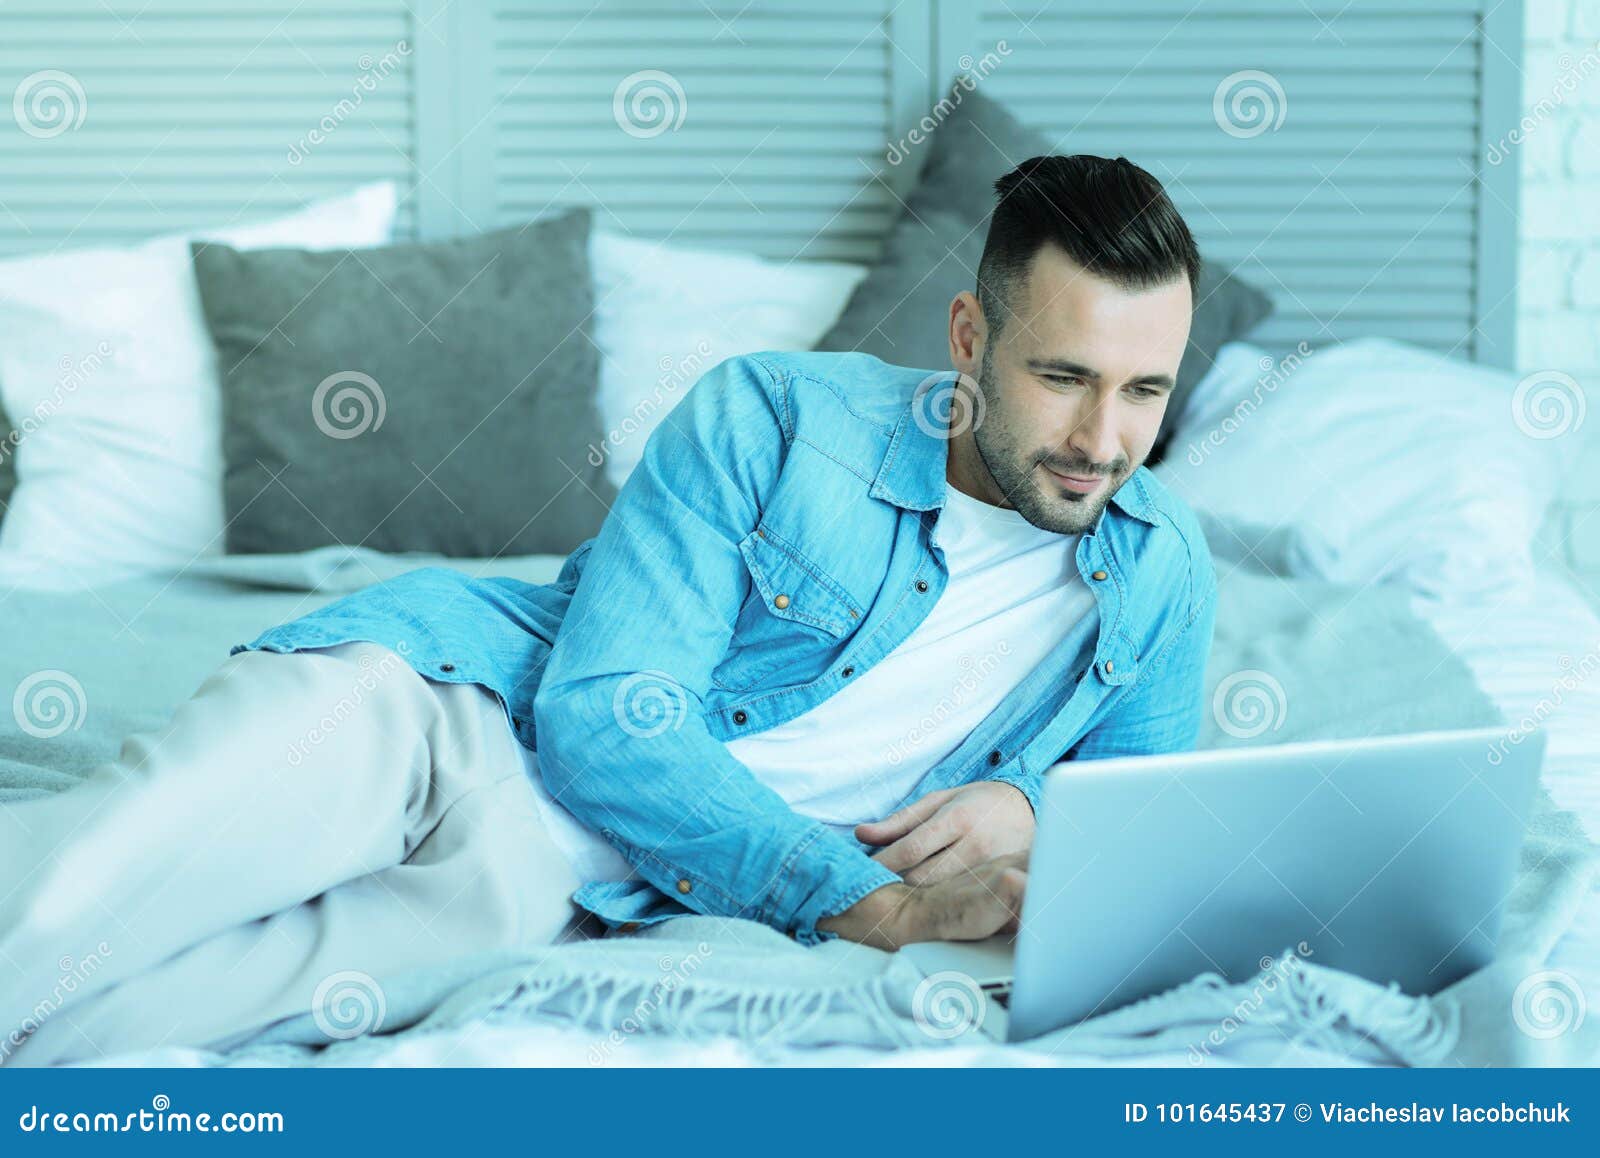 Relaxed Millennial Guy Lying In Bed With Laptop Stock Image Image Of Literacy Networking